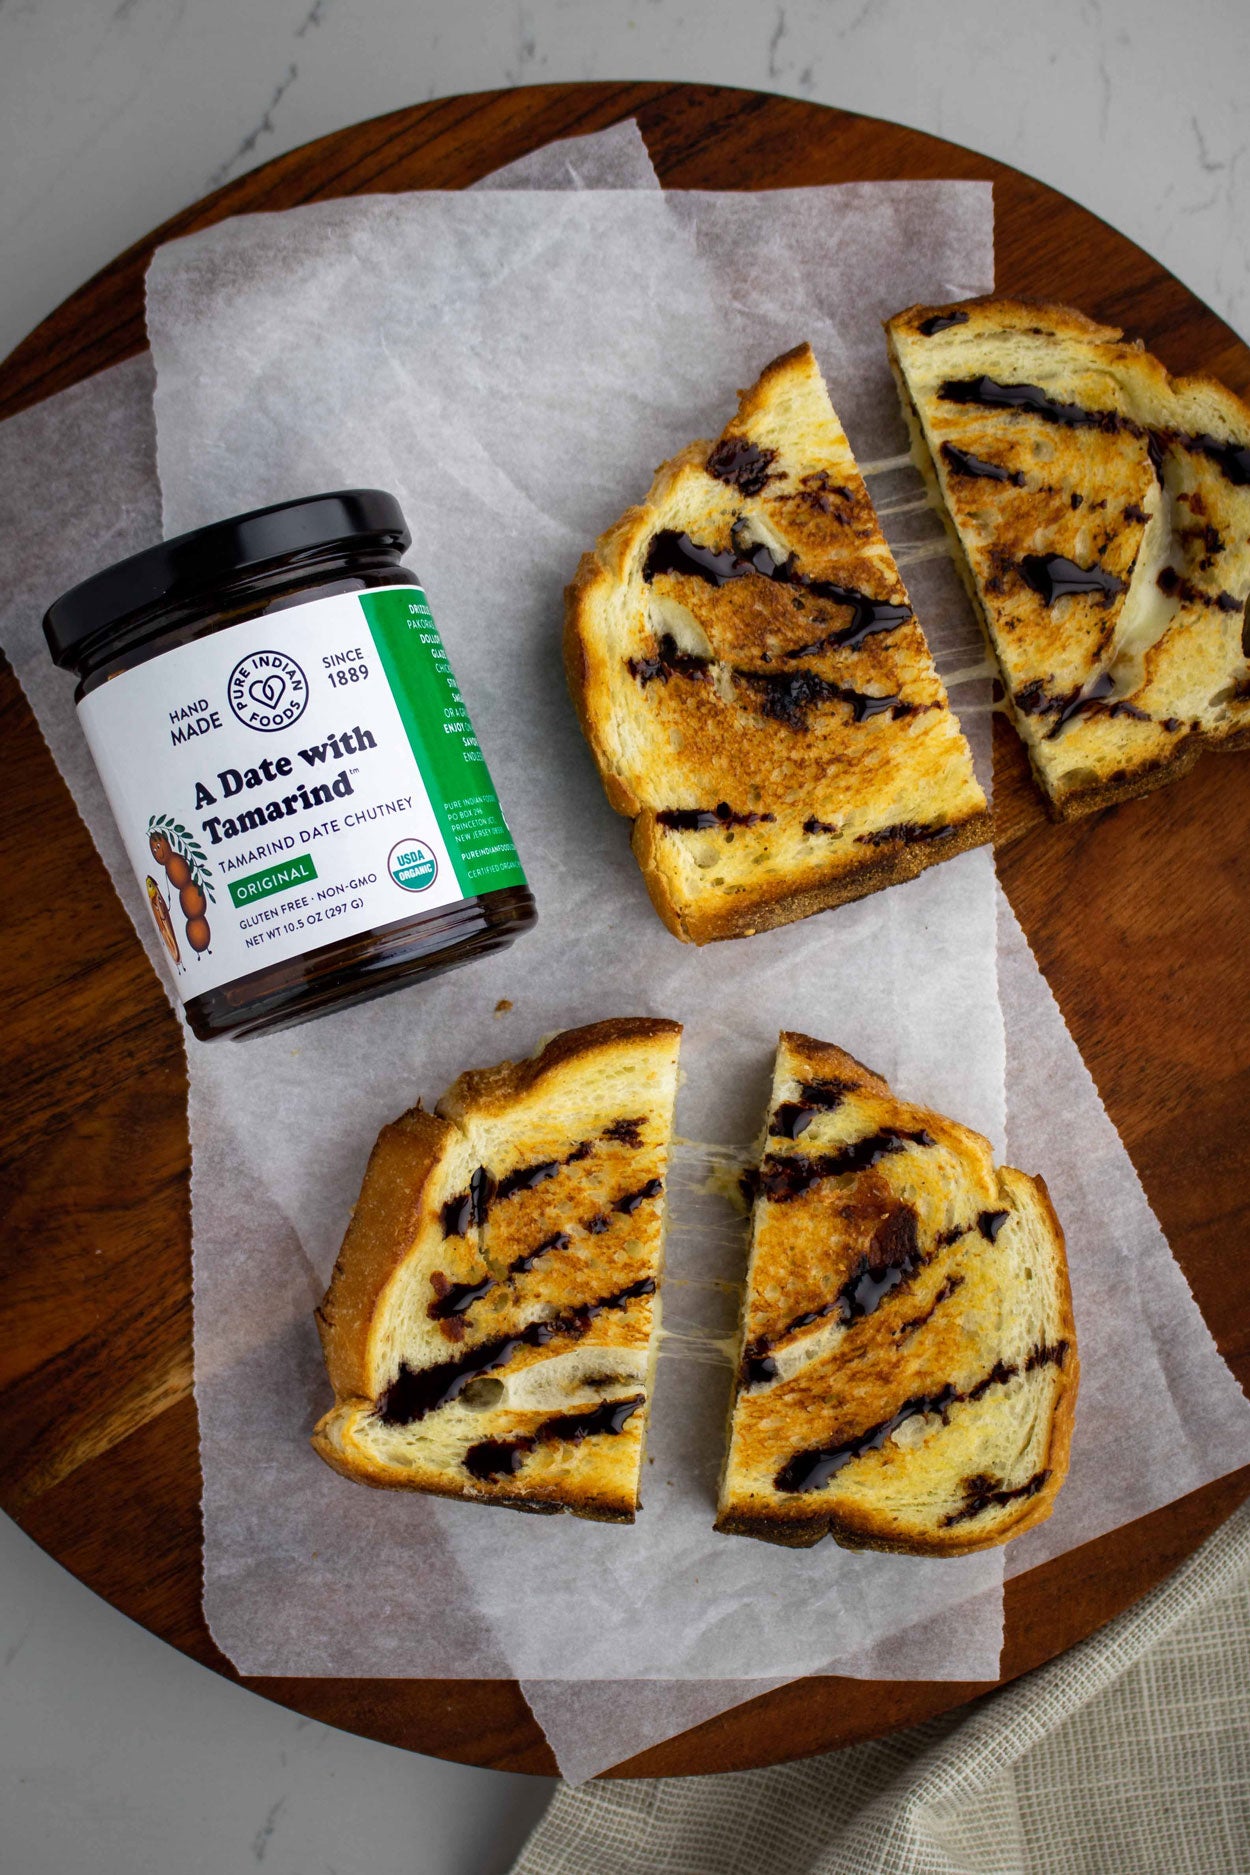 Two gooey grilled cheese sandwiches drizzled with the organic sweet tamarind chutney, also known as an imli chutney, from Pure Indian Foods